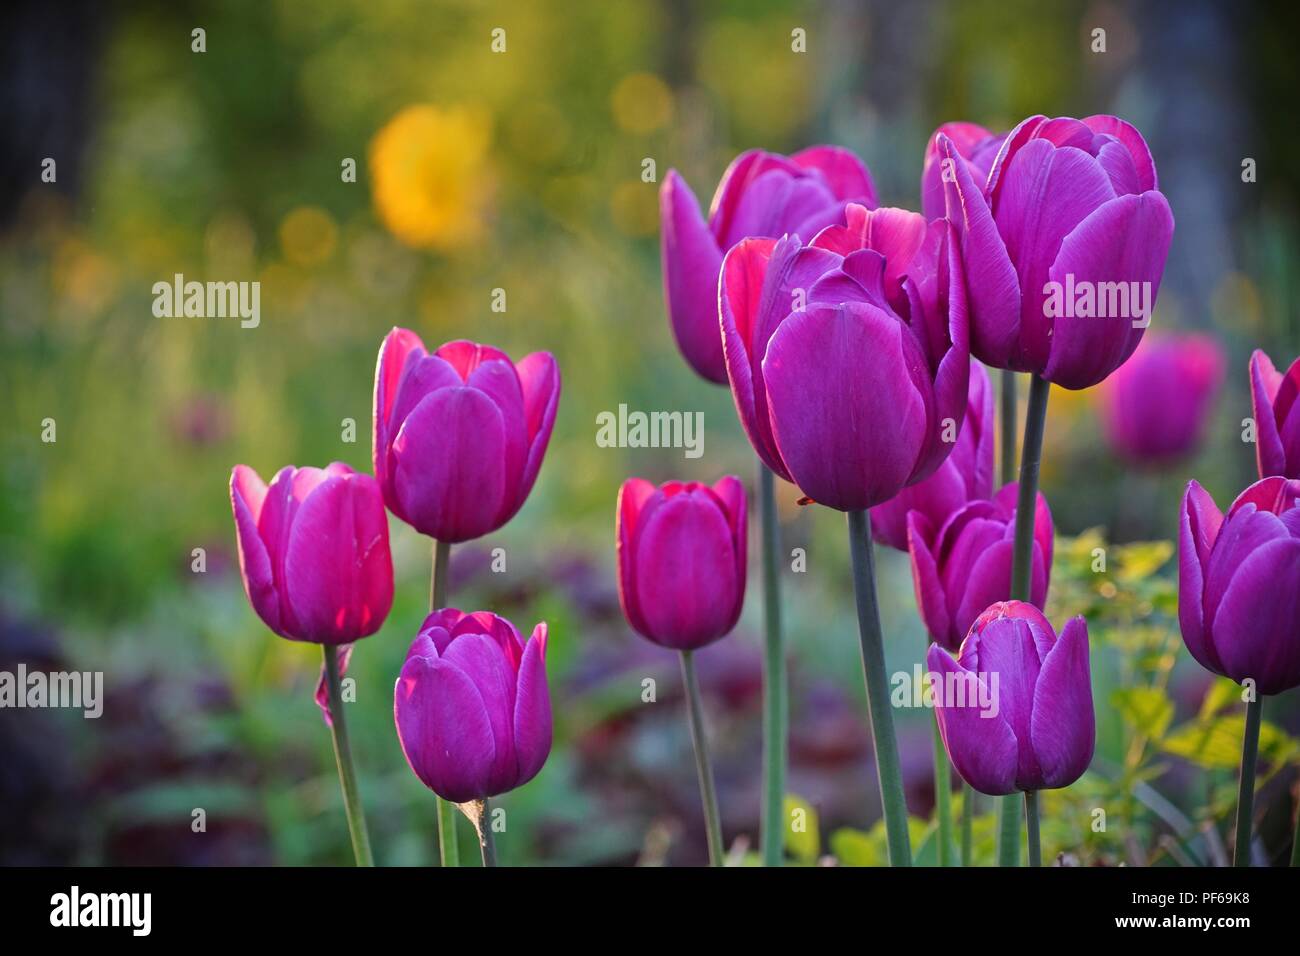 Group of purple tulips in a park, blurred background Stock Photo